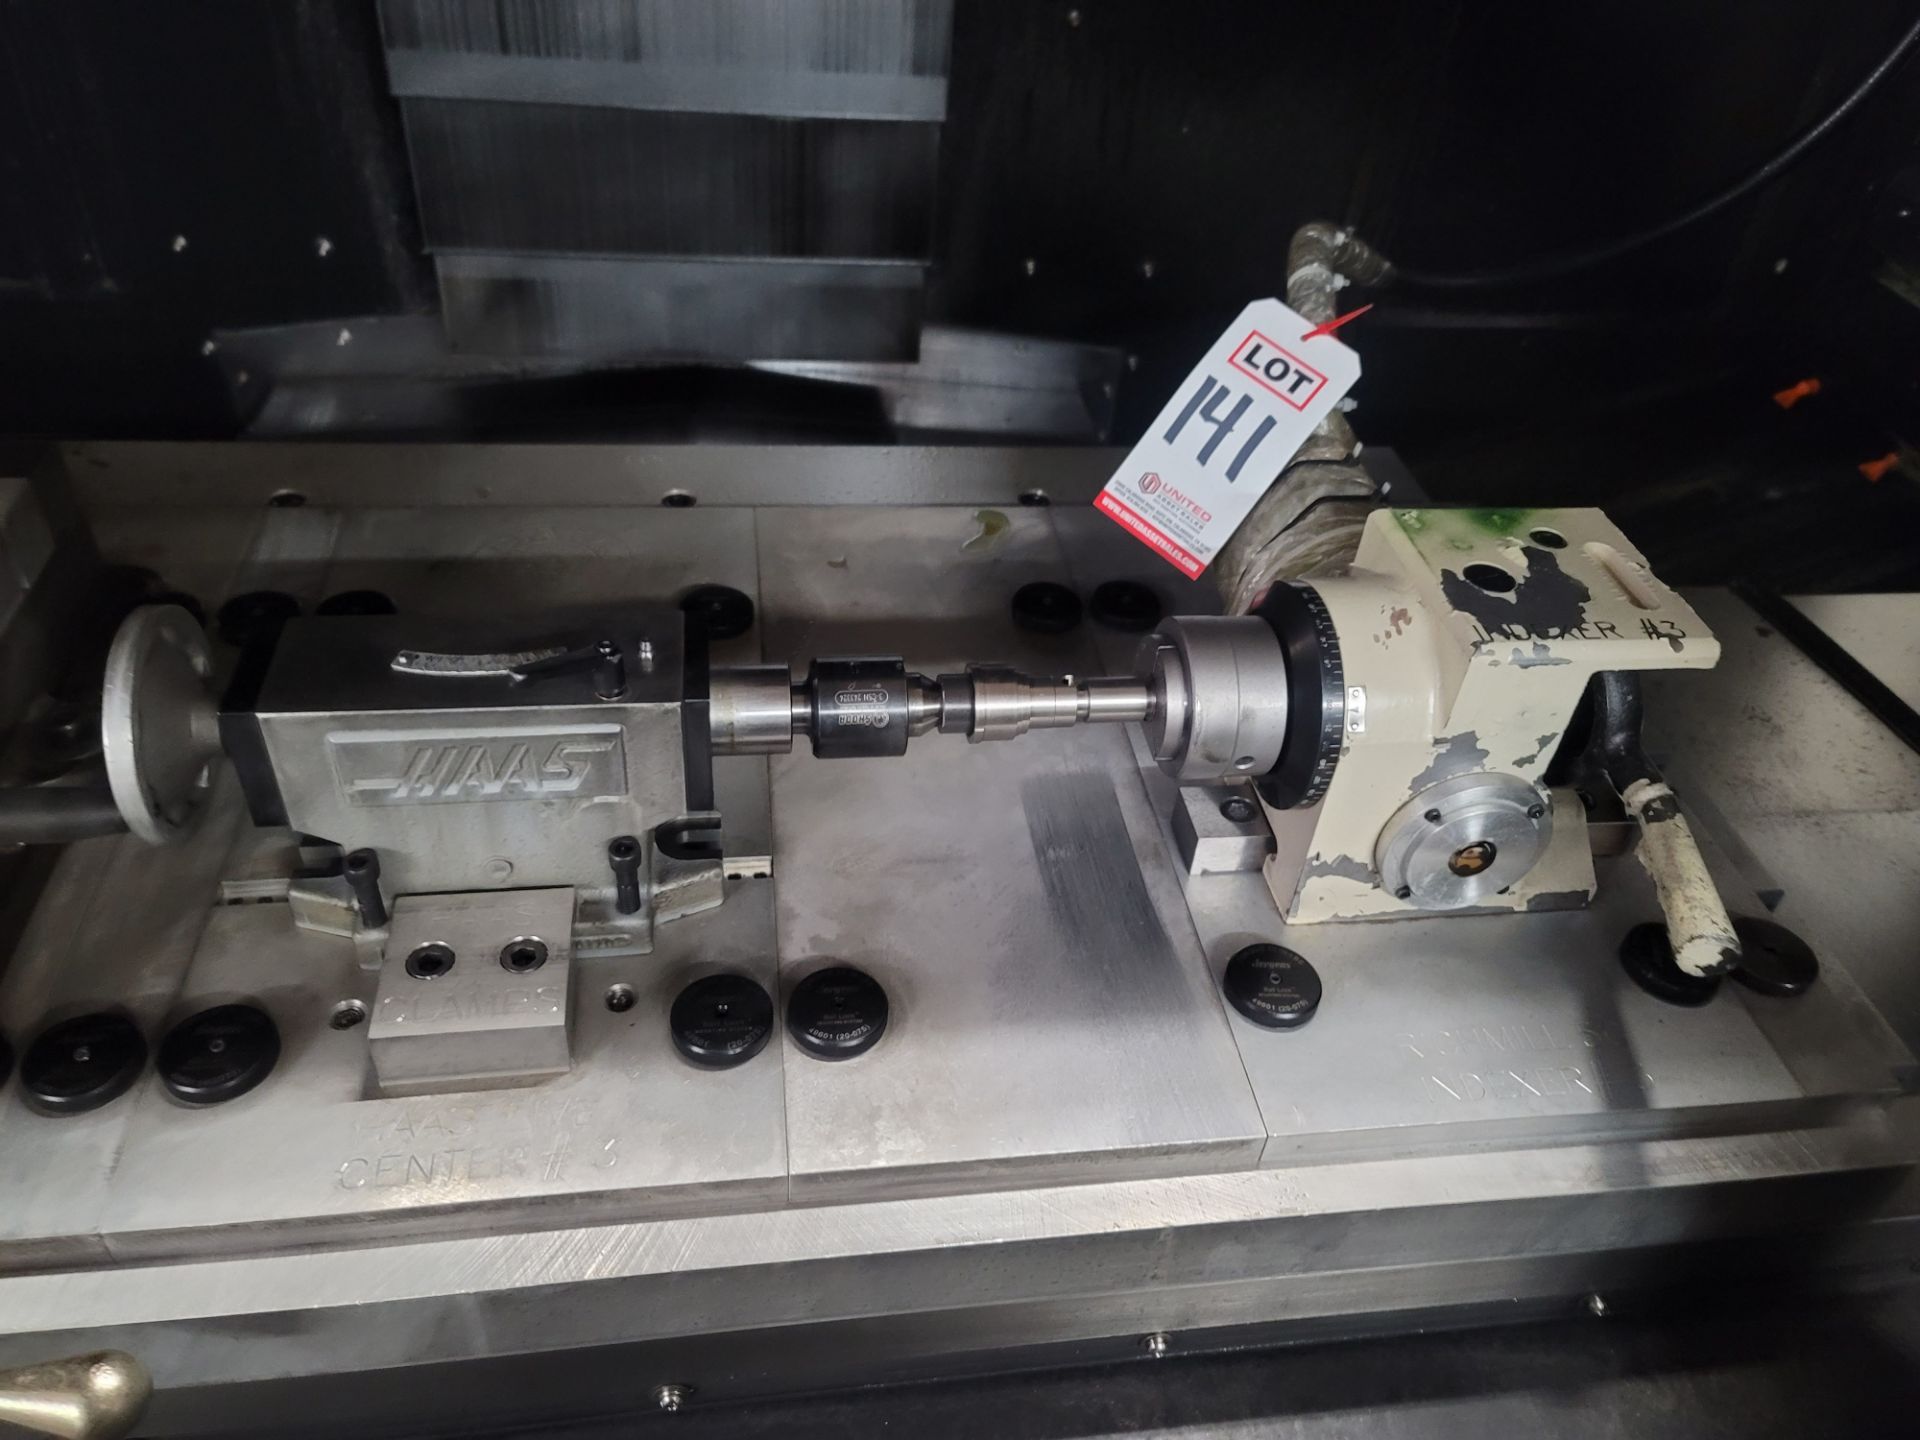 RICHMILL 1X5C ROTARY INDEXER W/ RICHMILL RICHMATE CNC INTERFACE CONTROLLER AND HAAS CENTER